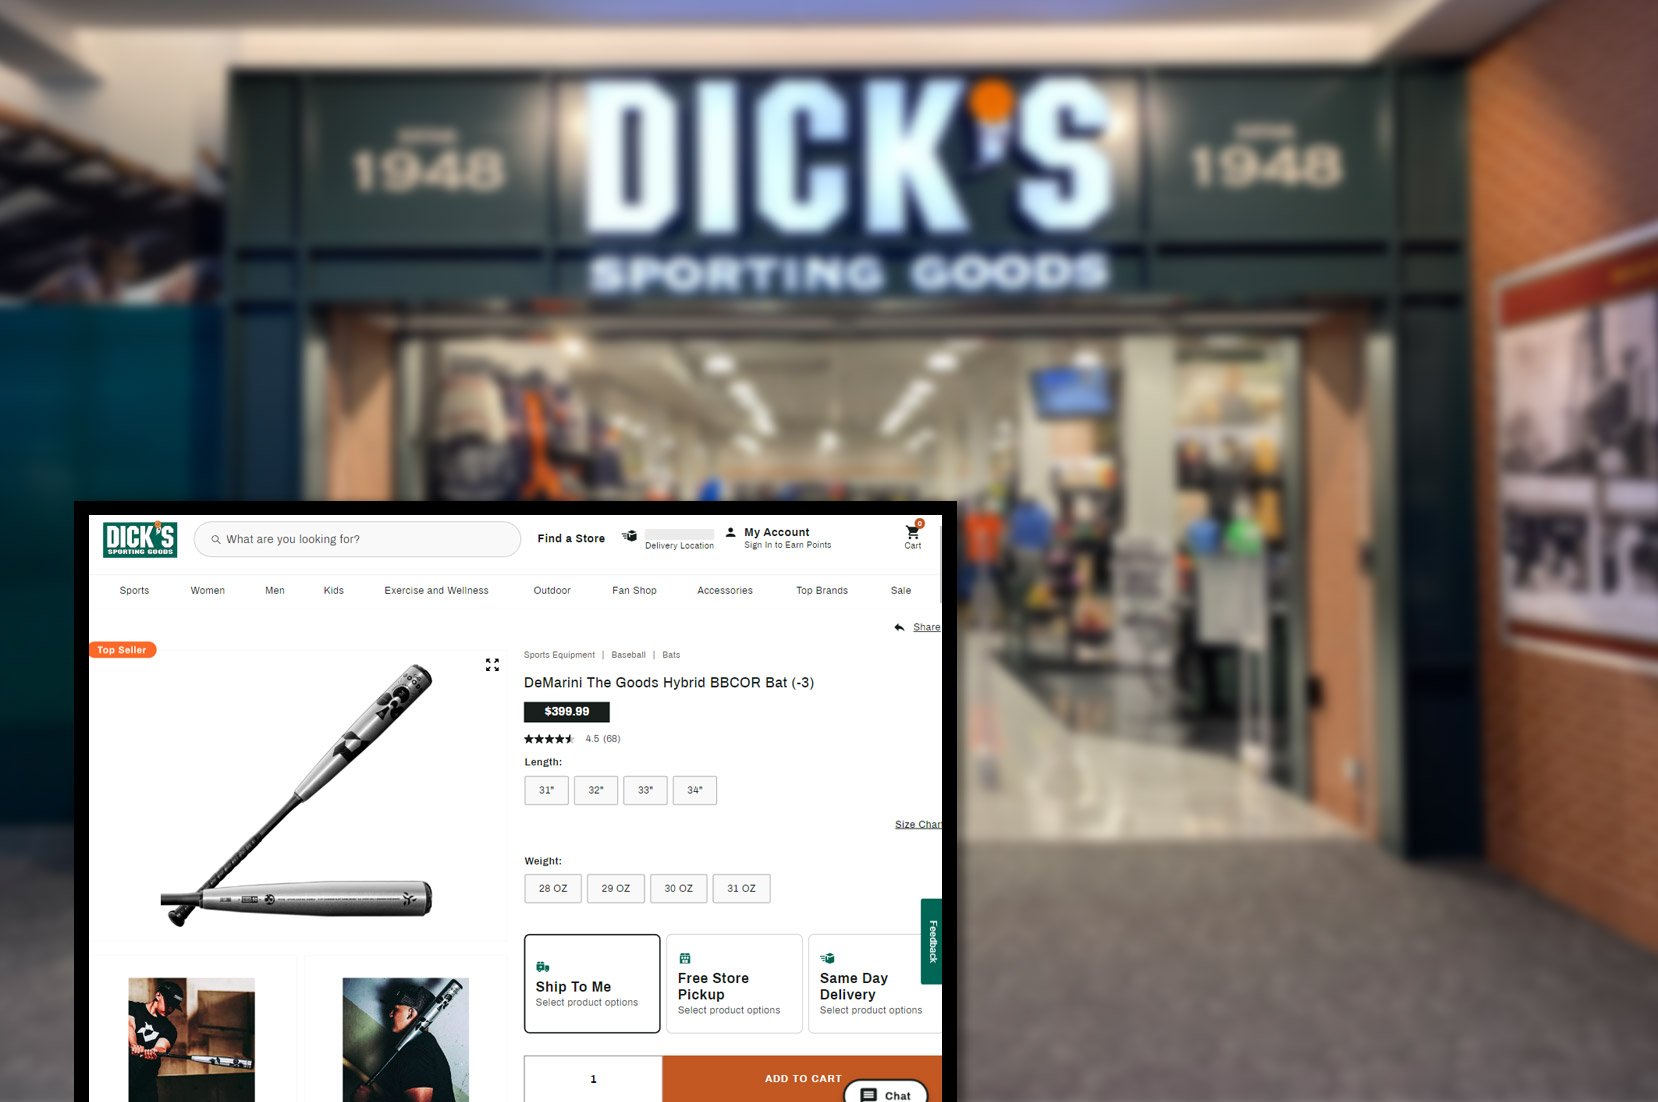 dickssportinggoods-comproduct-pricing-information-and-image-scraping-services